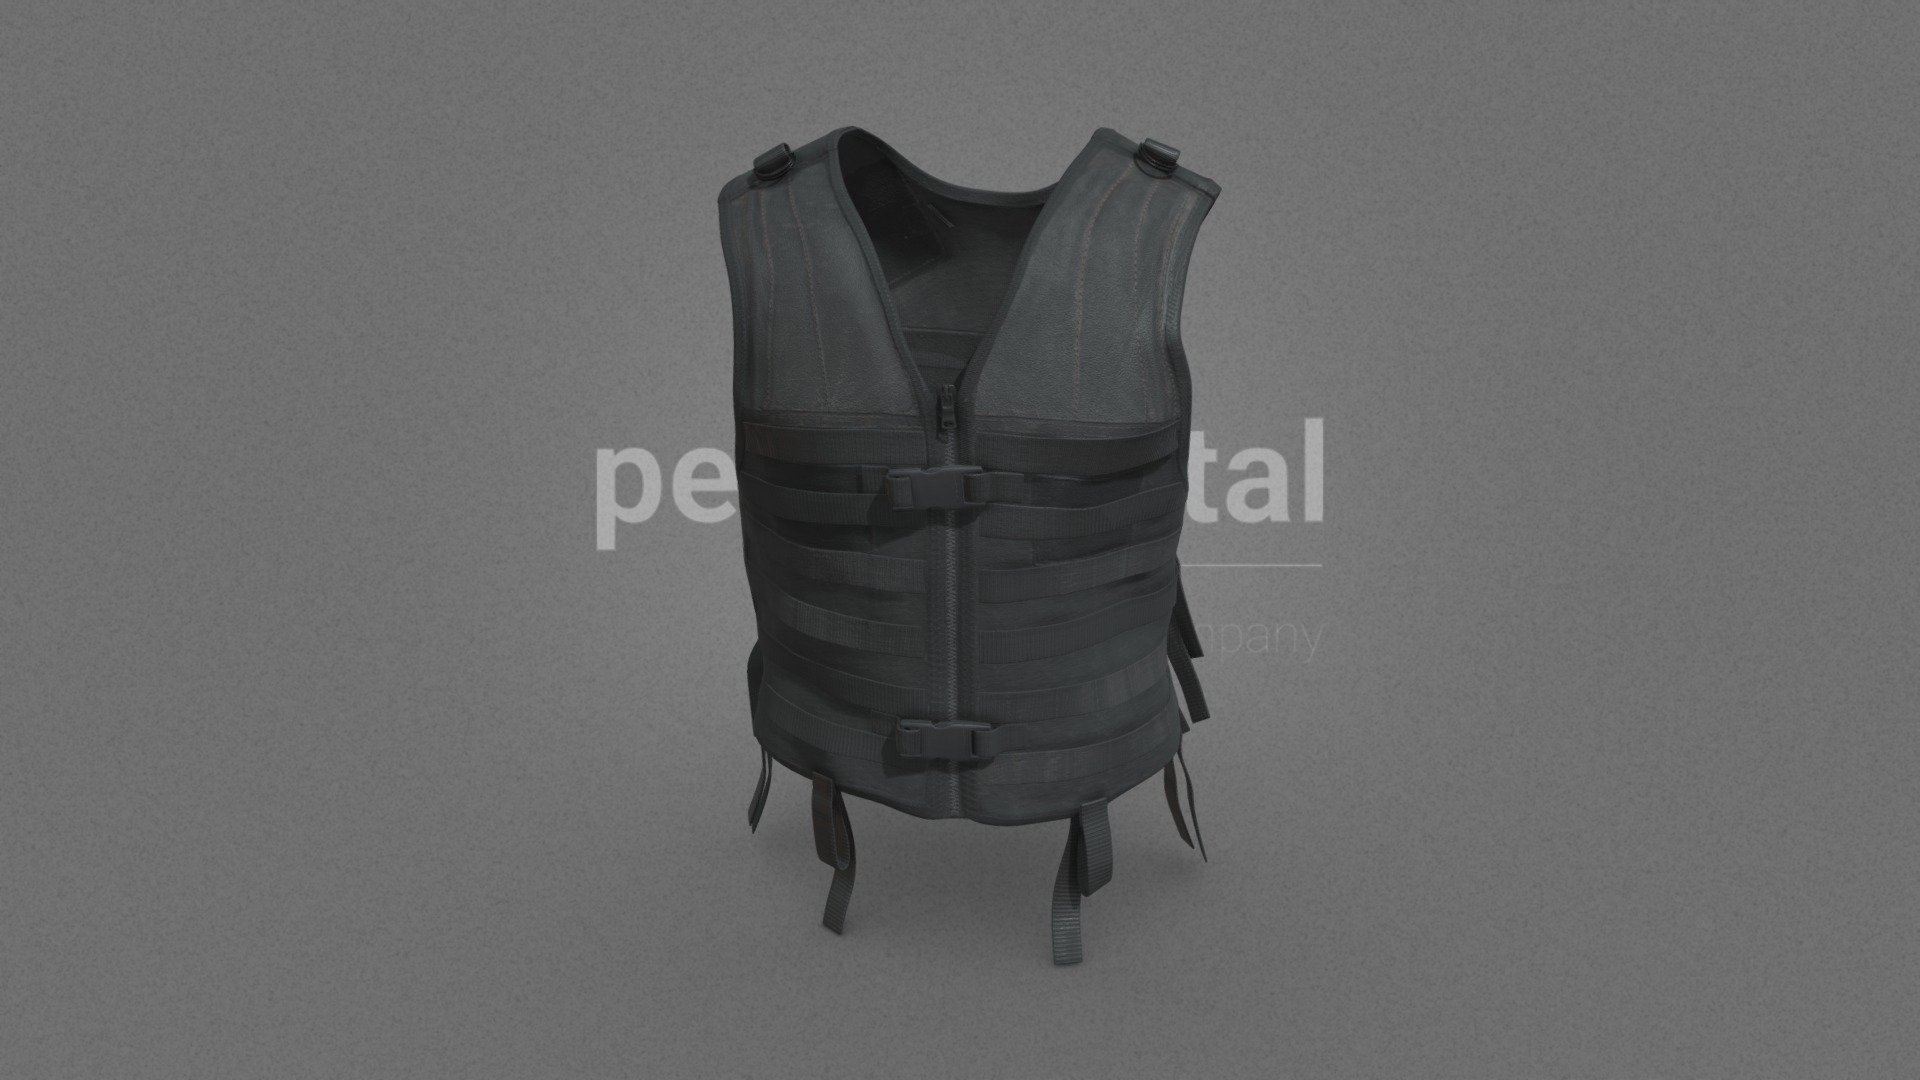 Our Wasteland Garments collection consists of several garments, which you can use in your audiovisual creations, extracted and modeled from our catalog of photogrammetry pieces.

They are optimized for use in 3D scenes of high polygonalization and optimized for rendering. We do not include characters, but they are positioned for you to include and adjust your own character. They have a model LOW (_LODRIG) inside the Blender file (included in the AdditionalFiles), which you can use for vertex weighting or cloth simulation and thus, make the transfer of vertices or property masks from the LOW to the HIGH** model.

We have included the texture maps in high resolution, as well as the Displacement maps, so you can make extreme point of view with your 3D cameras, as well as the Blender file so you can edit any aspect of the set.

Enjoy it.

Web: https://peris.digital/ - Wasteland Garments Series - Model 10 Vest - Buy Royalty Free 3D model by Peris Digital (@perisdigital) 3d model